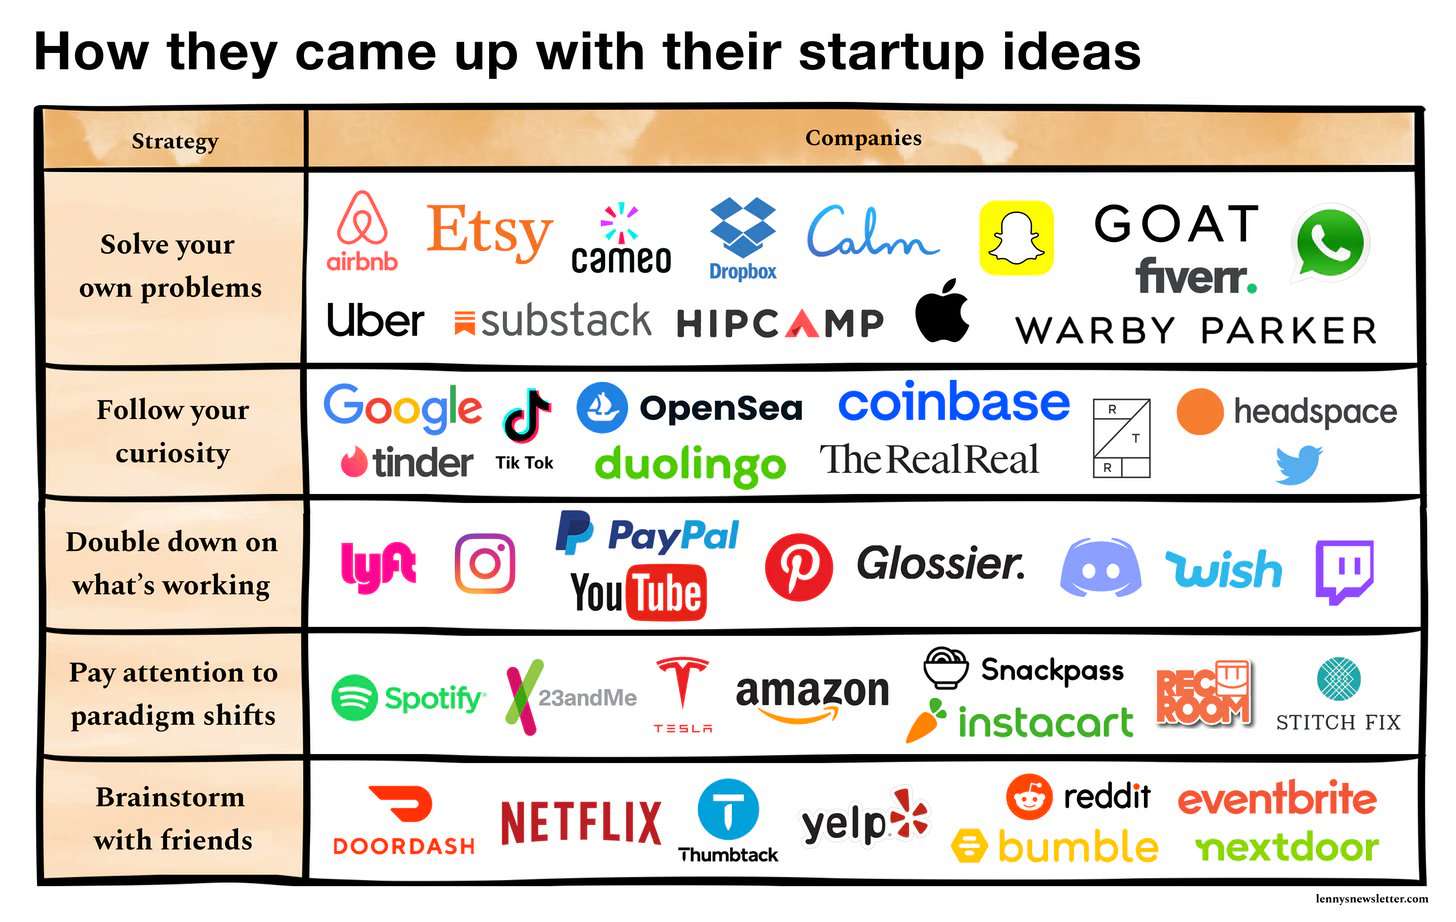 Seleccione recepción Kakadu Lenny Rachitsky on Twitter: "My biggest surprises from researching how 50  of today's biggest consumer companies came up with their startup idea: 1.  Only 1 company came up with their idea by